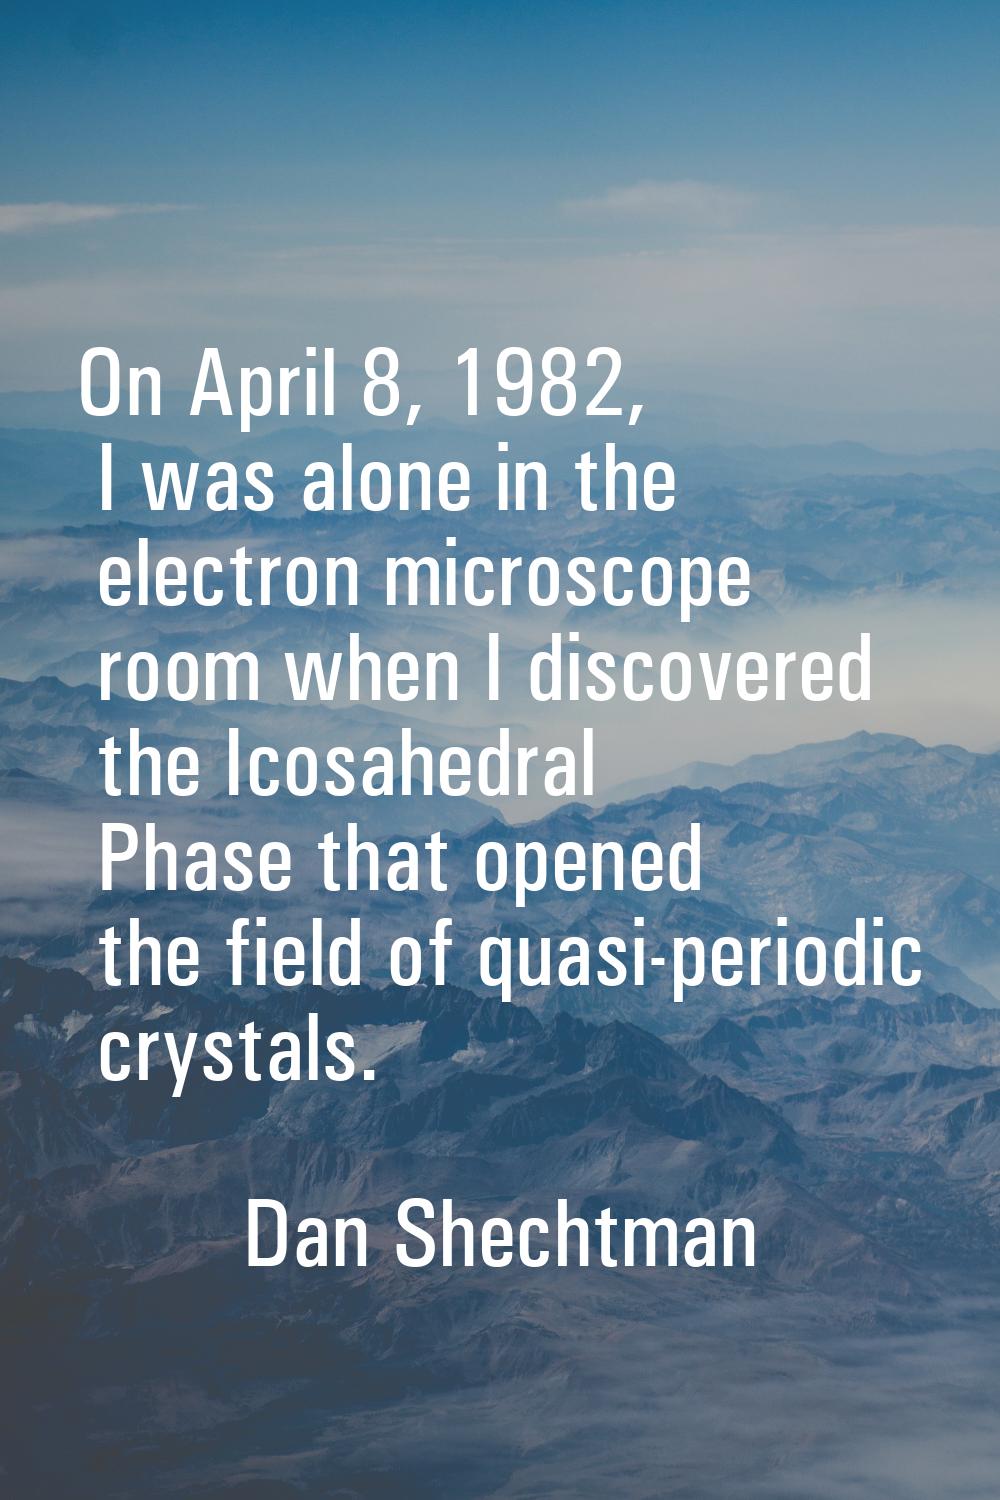 On April 8, 1982, I was alone in the electron microscope room when I discovered the Icosahedral Pha